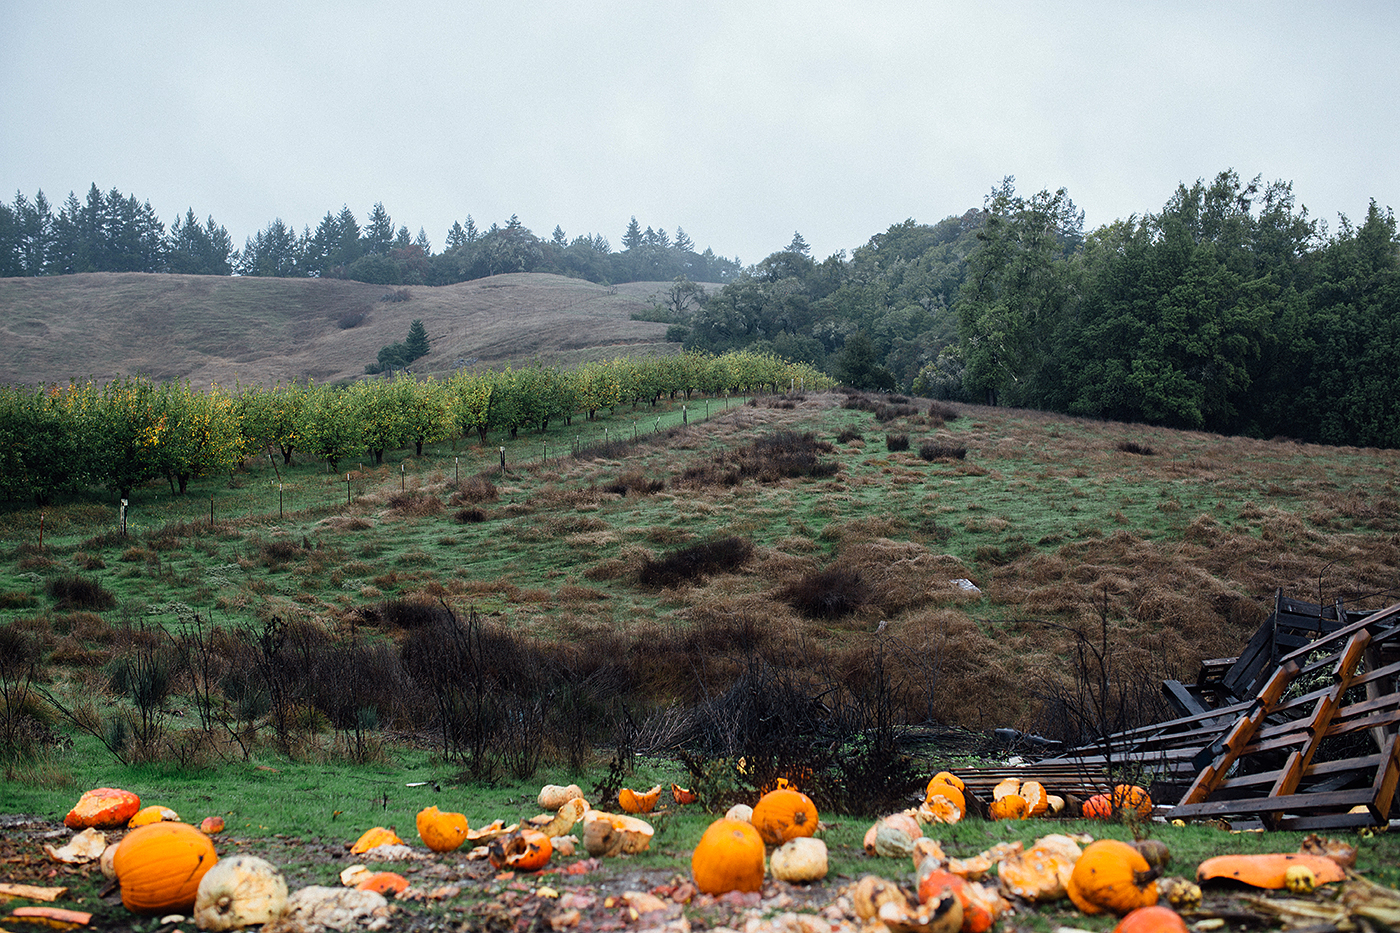 Remnants of fall - pumpkins on the hillside near Gowan's family orchards 